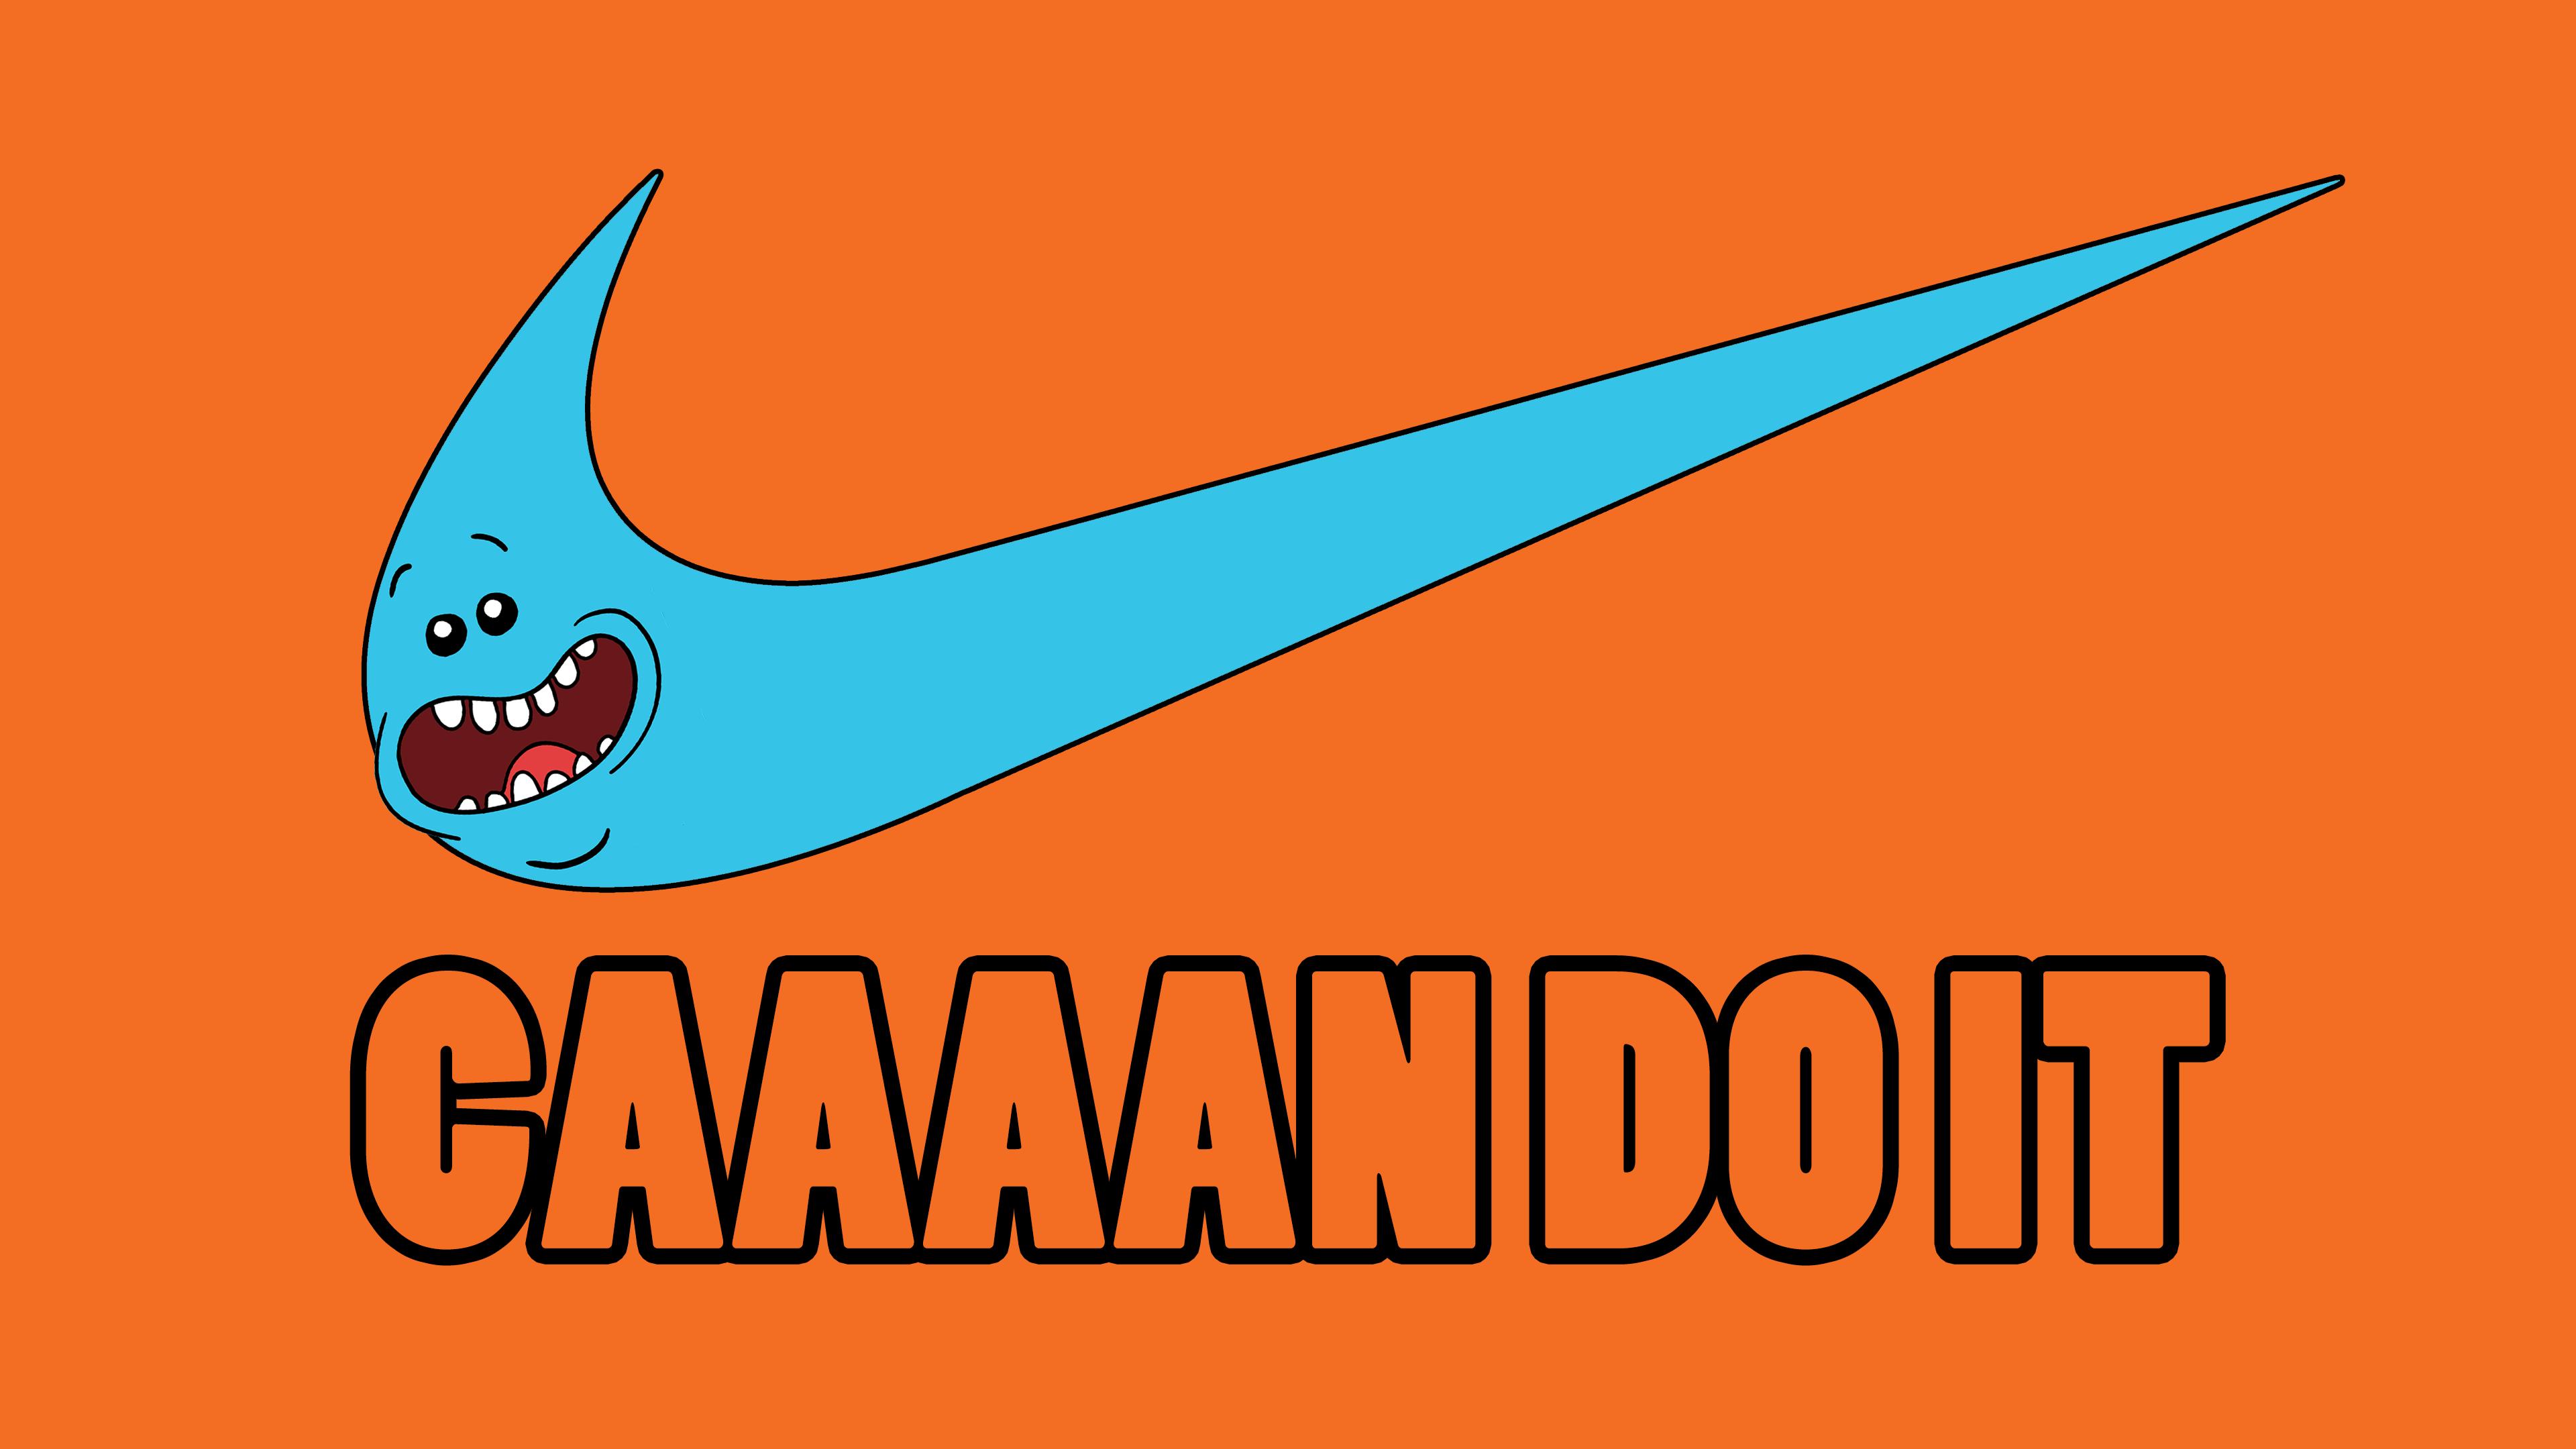 I made my own Meeseeks/Nike Wallpapers for 4k, 1440p, 1080p, and.